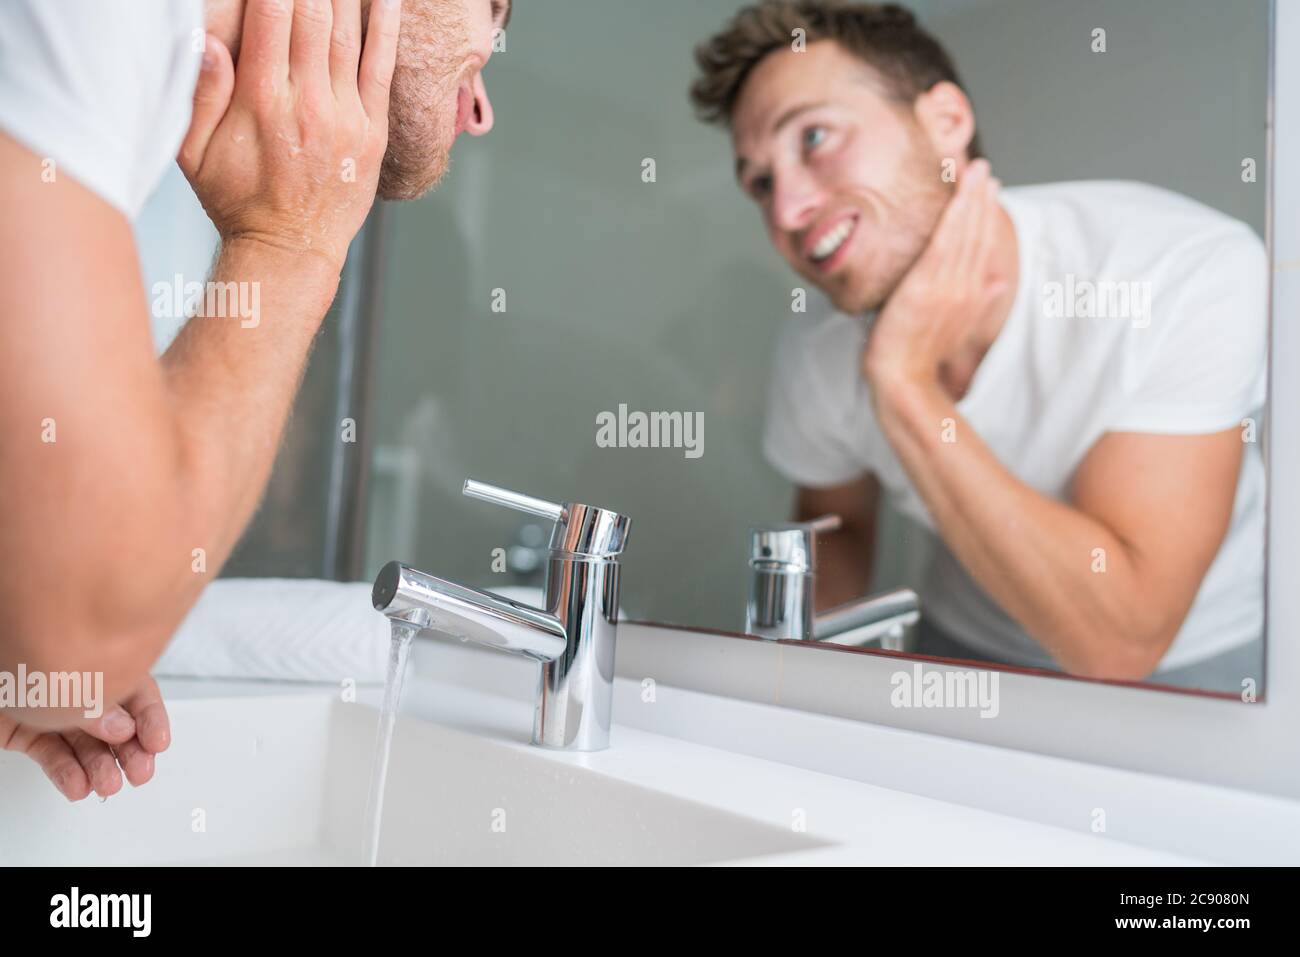 Man washing face in sink in bathroom rinsing after shaving. Home lifestyle copyspace Stock Photo